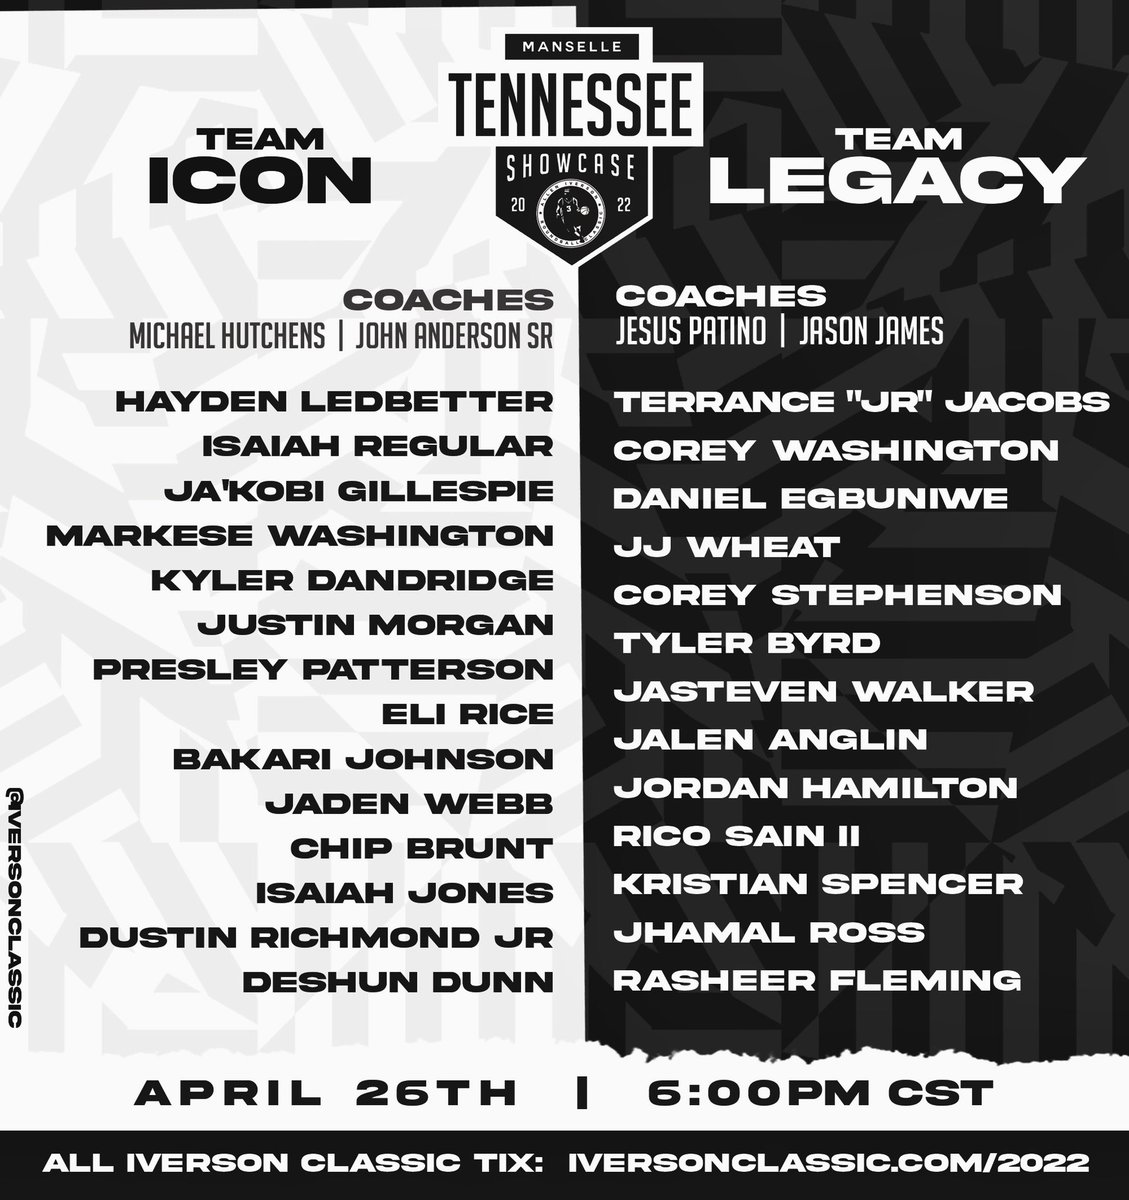 The FIRST EVENT of Iverson Classic Week 2022 pits the best basketball talent in the region head-to-head for the first-ever MANSELLE TENNESSEE SHOWCASE. Watch Team ICON take on Team LEGACY in two weeks. 🔥🔥🔥 Which squad you got?